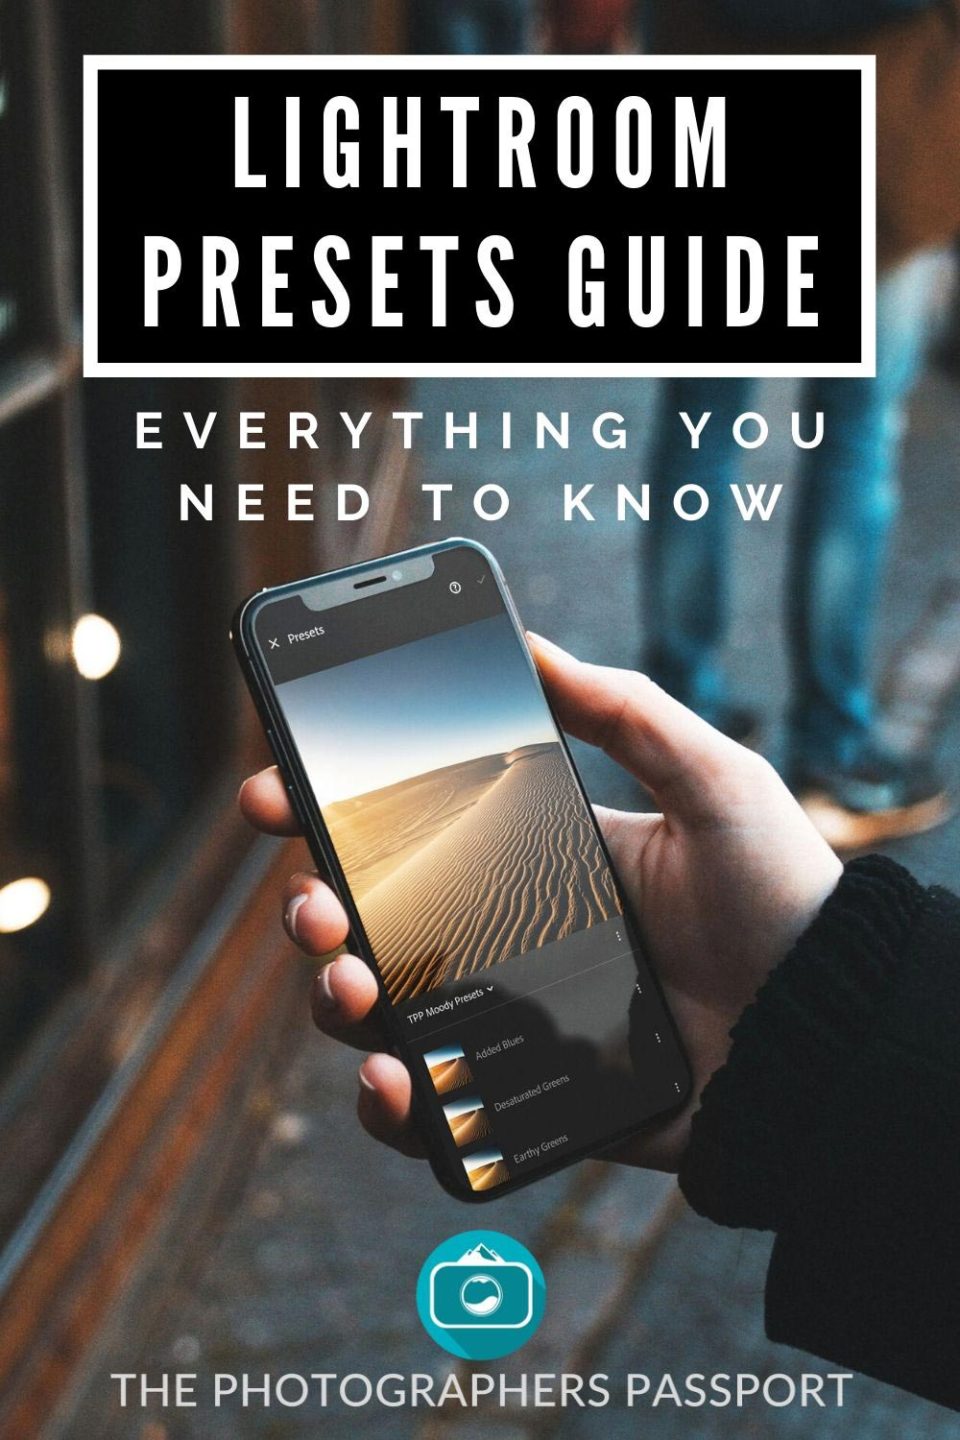 If you want to learn how to use Lightroom presets like a boss then check out this Lightroom presets guide that will explain all.